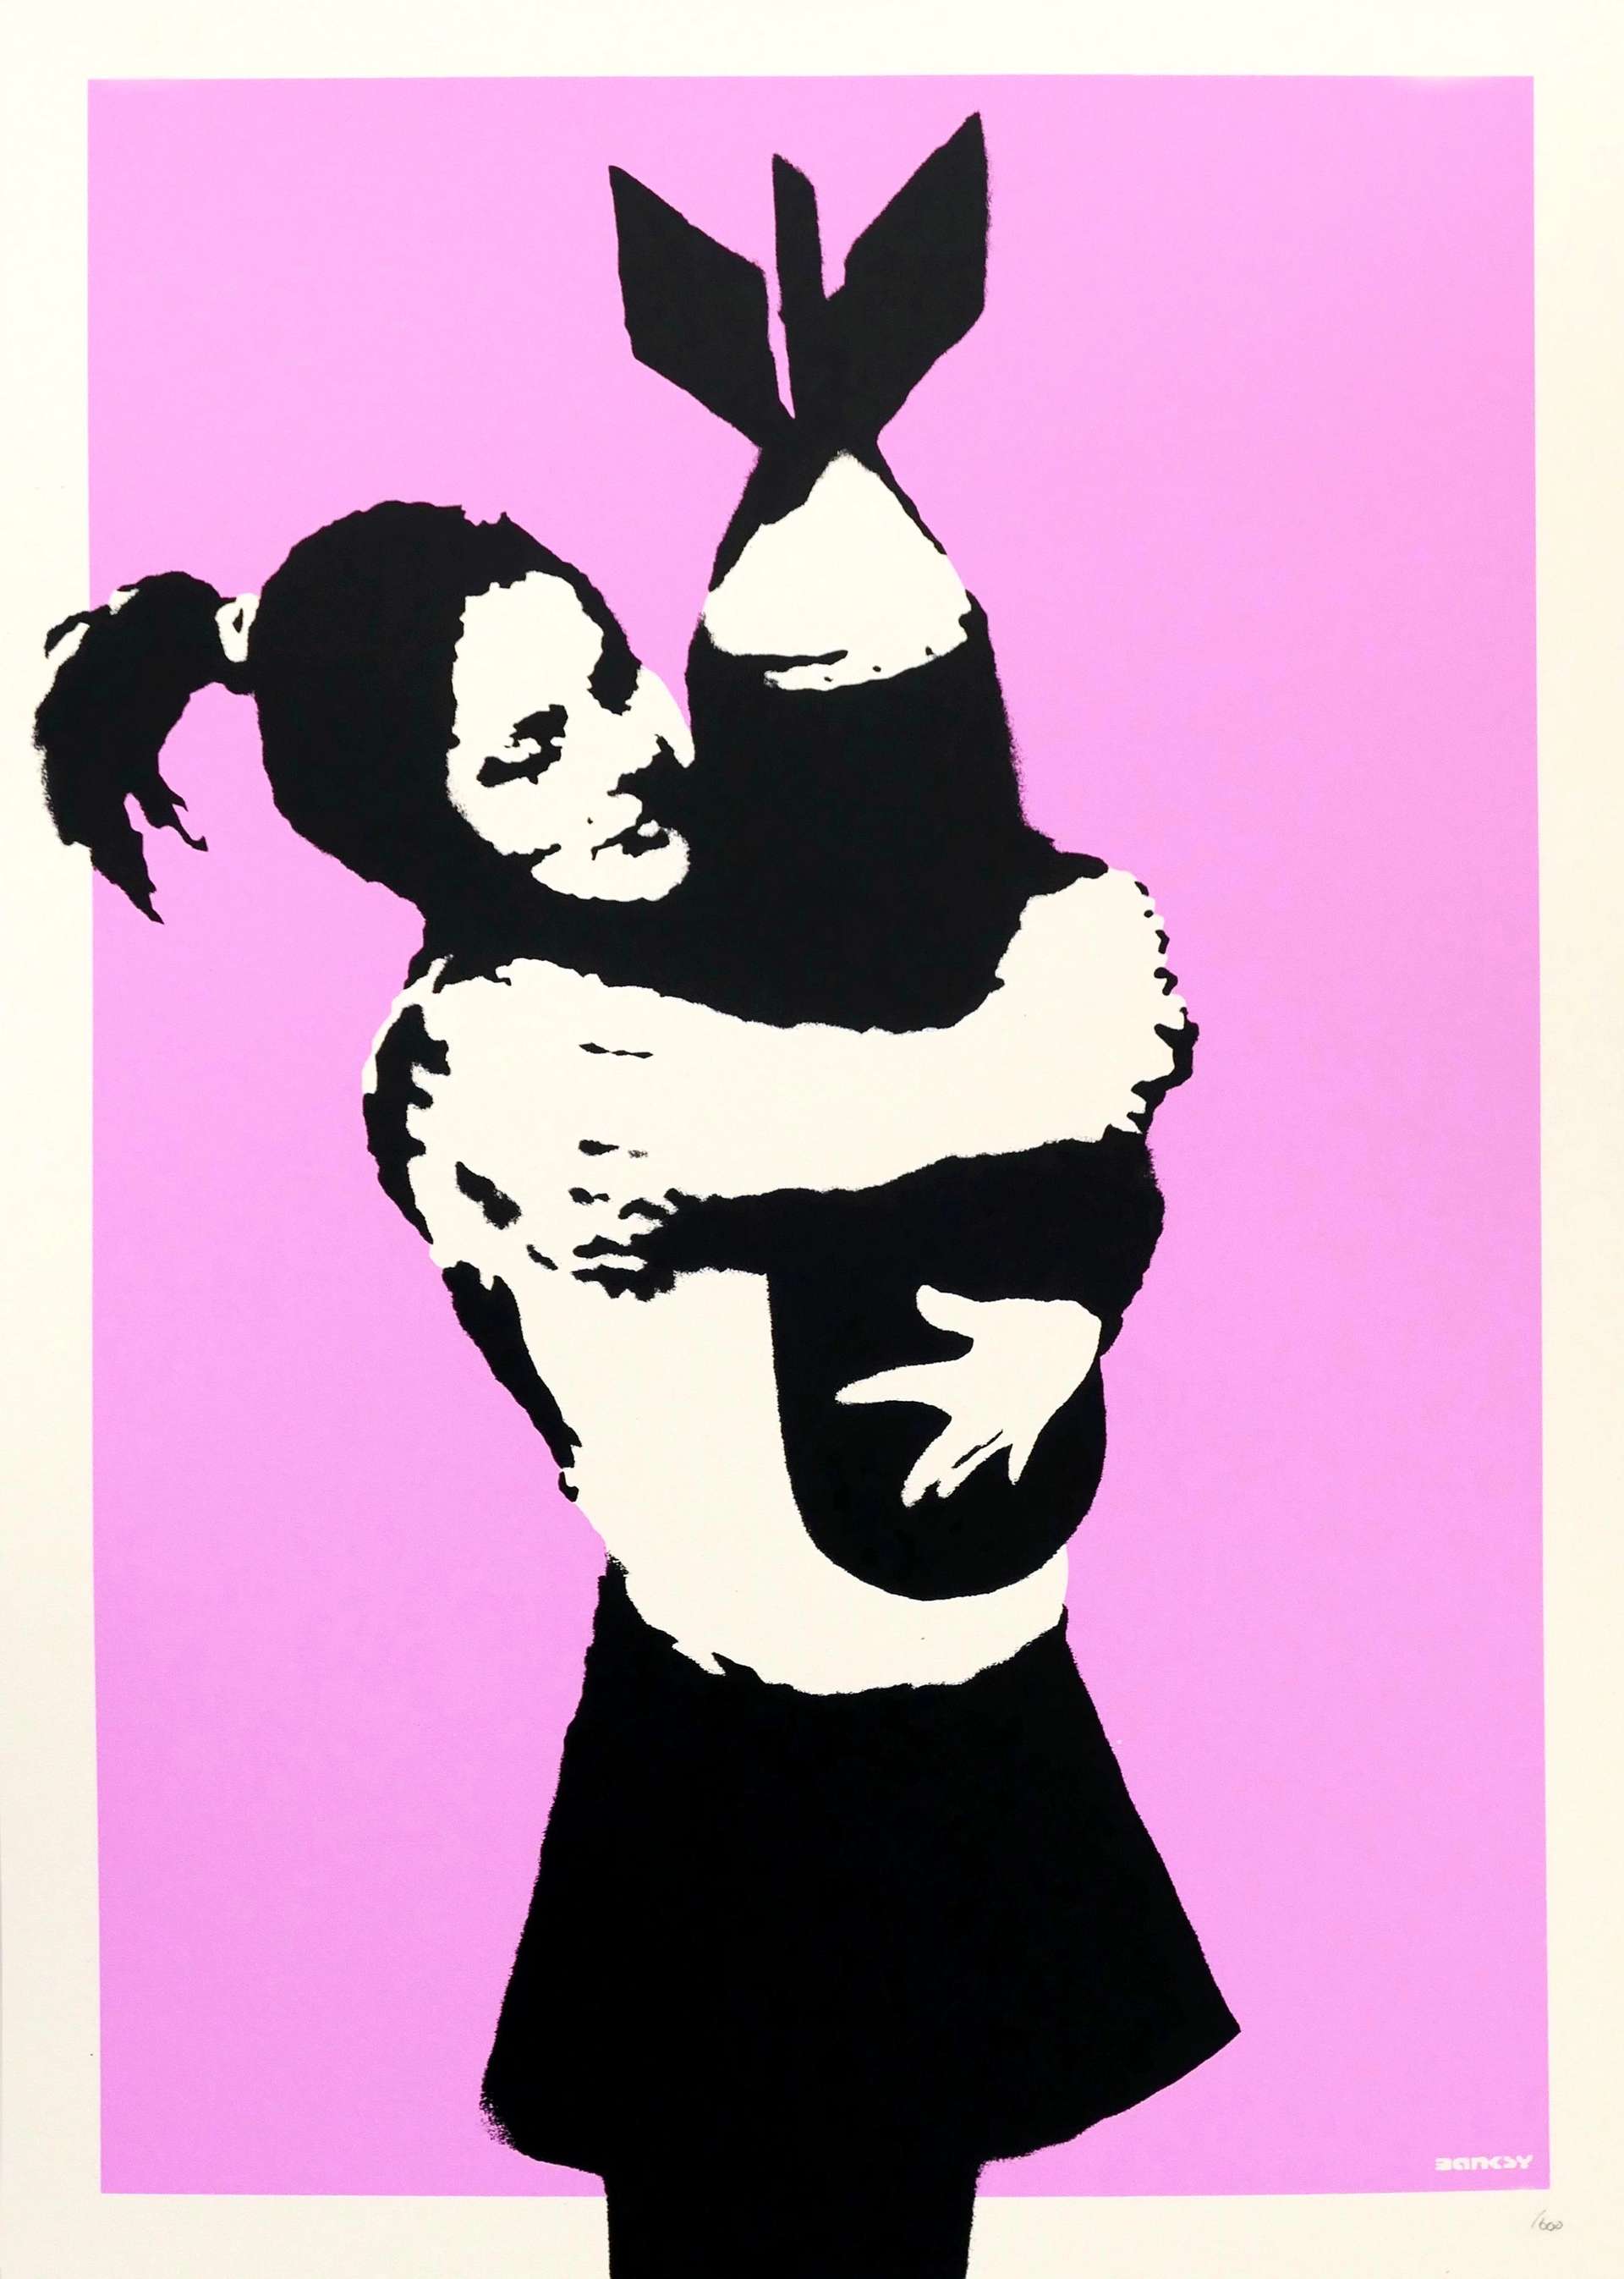 10 Facts About Banksy's Bomb Love 